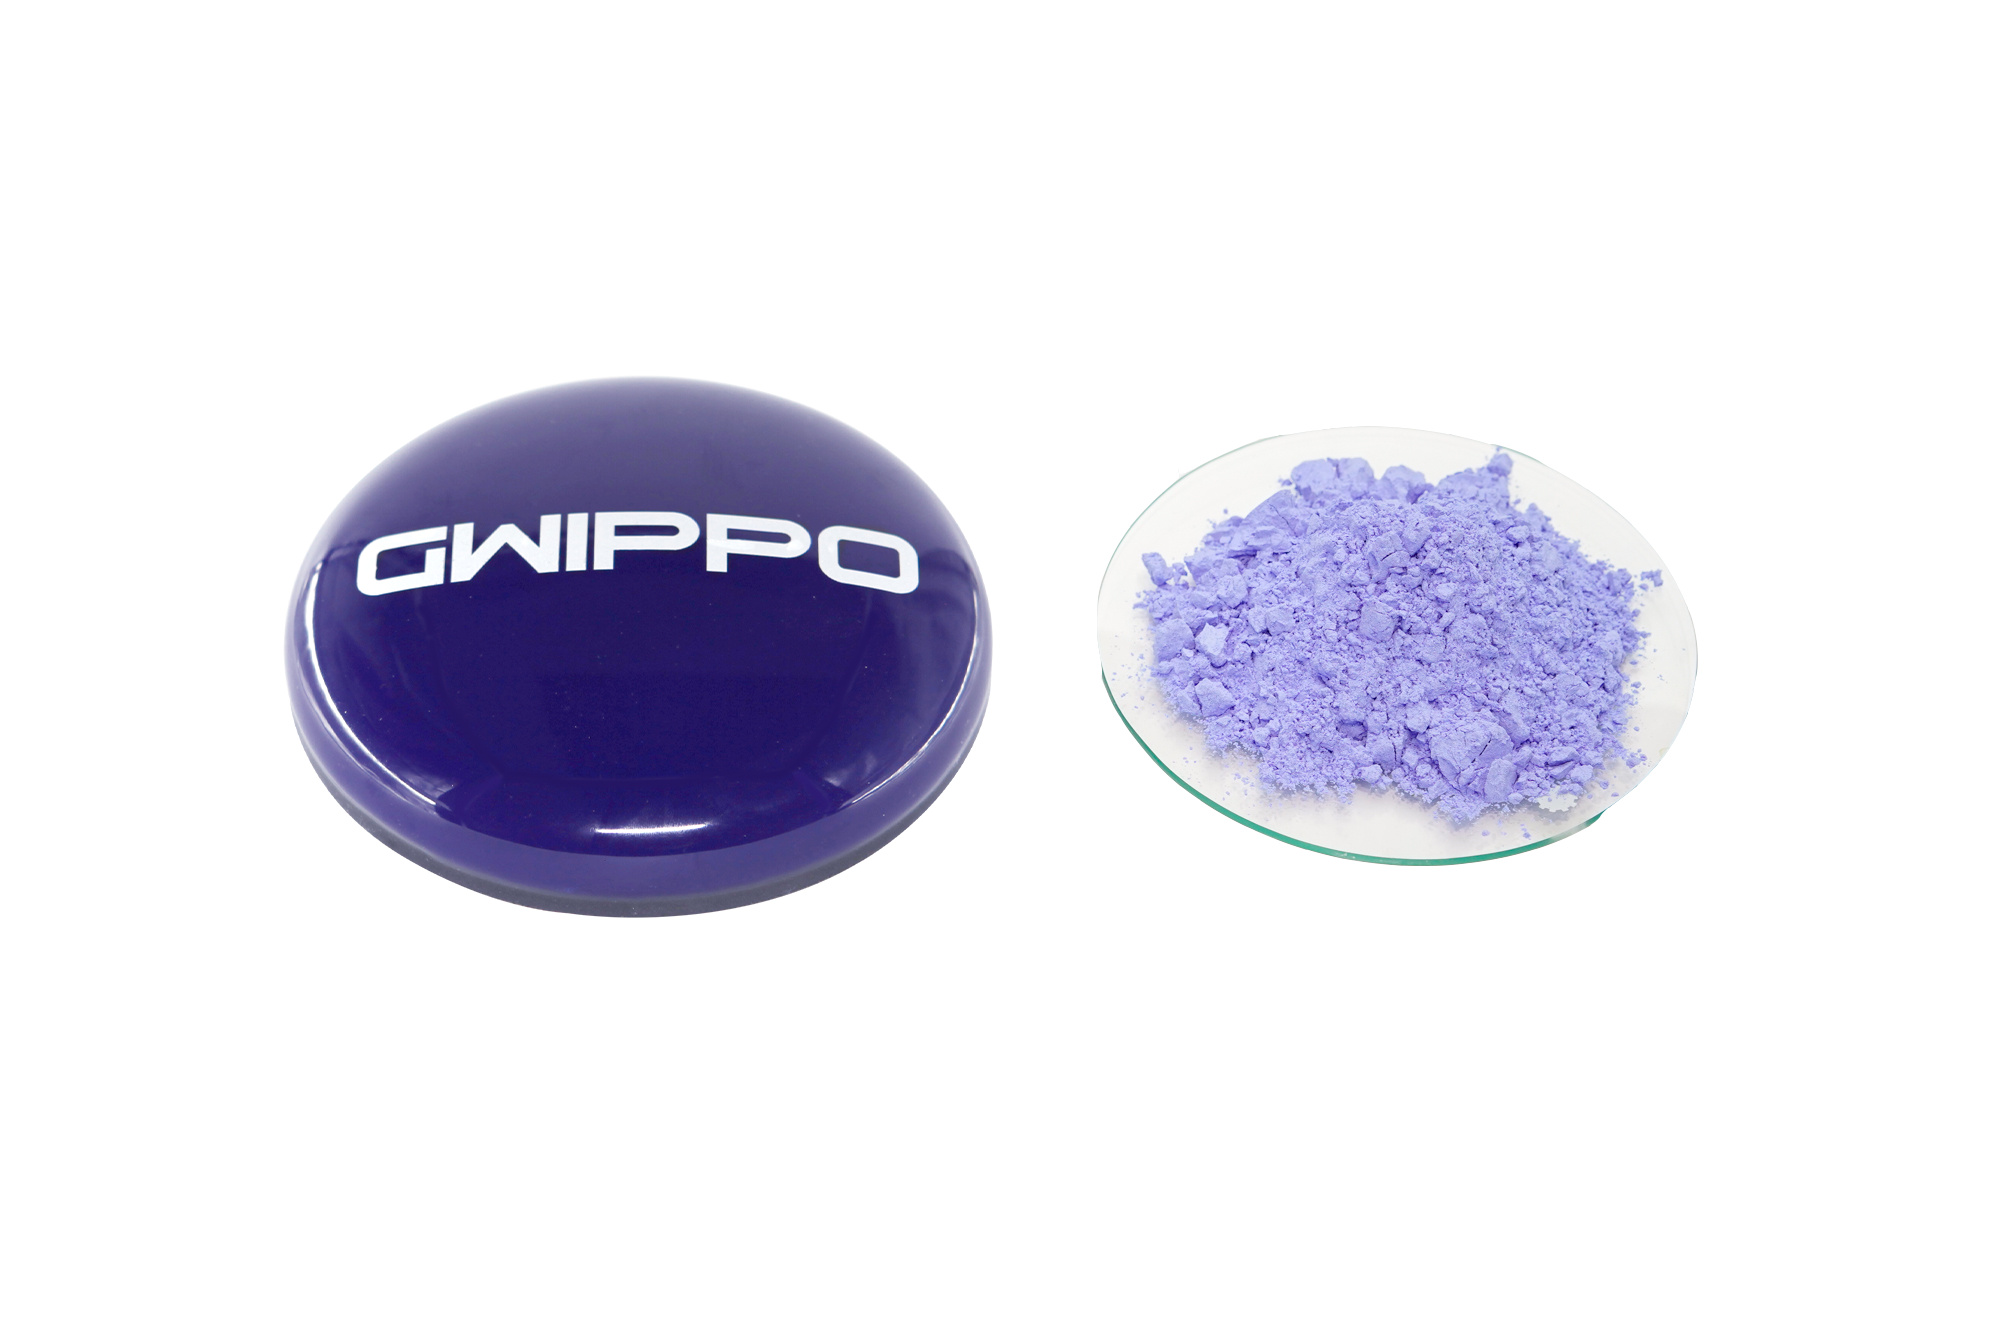 GWIPPO: a high-quality supplier leading the porcelain enamel frit industry